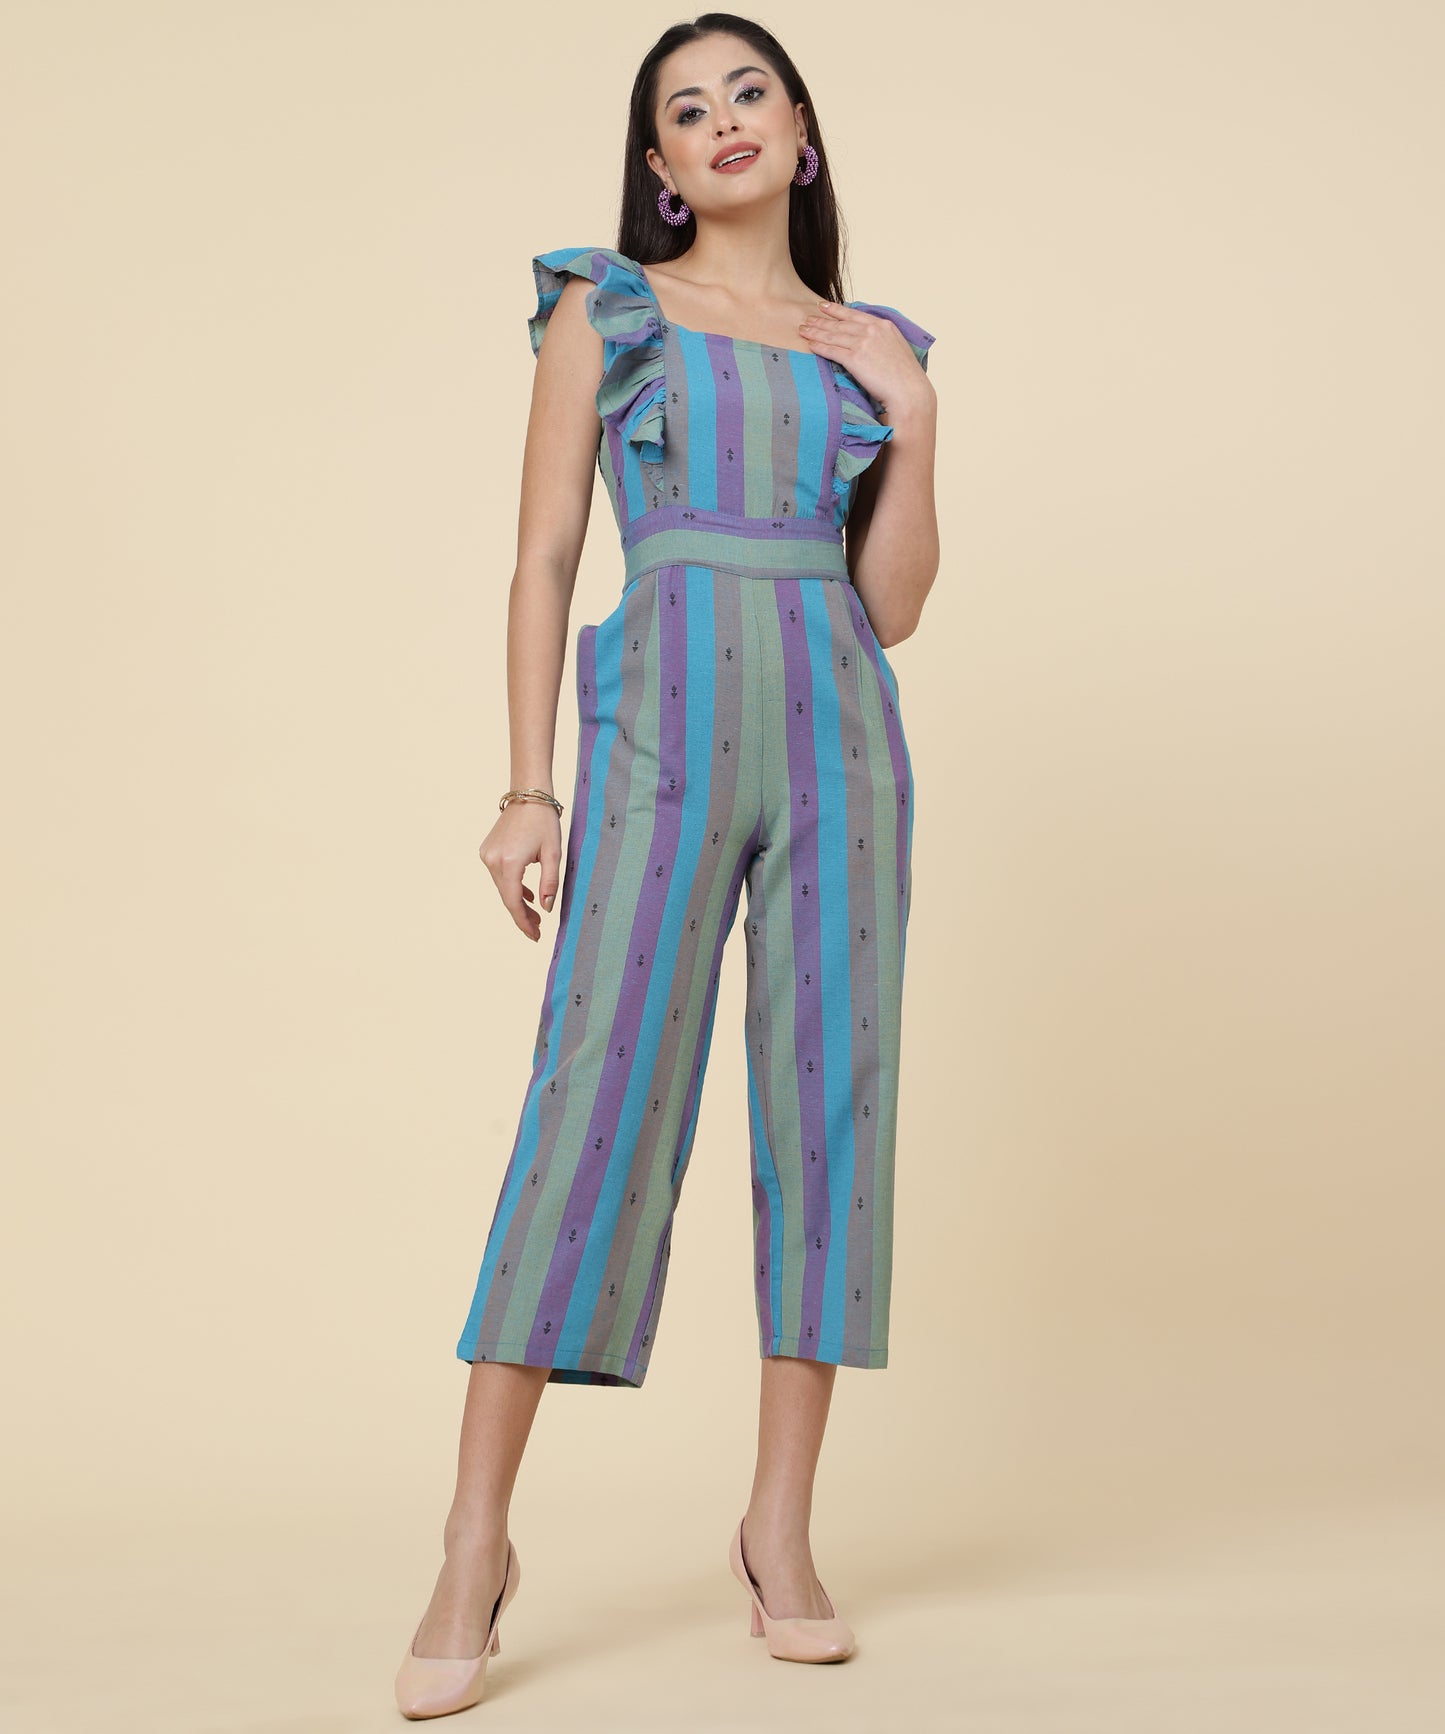 ANUSHIL Multicoloured Striped Jumpsuit for Women - Ruffle Sleeves, Ankle Length Jumsuit for Girls - Woven Cotton Fabric With Square Neck Style(Blue)